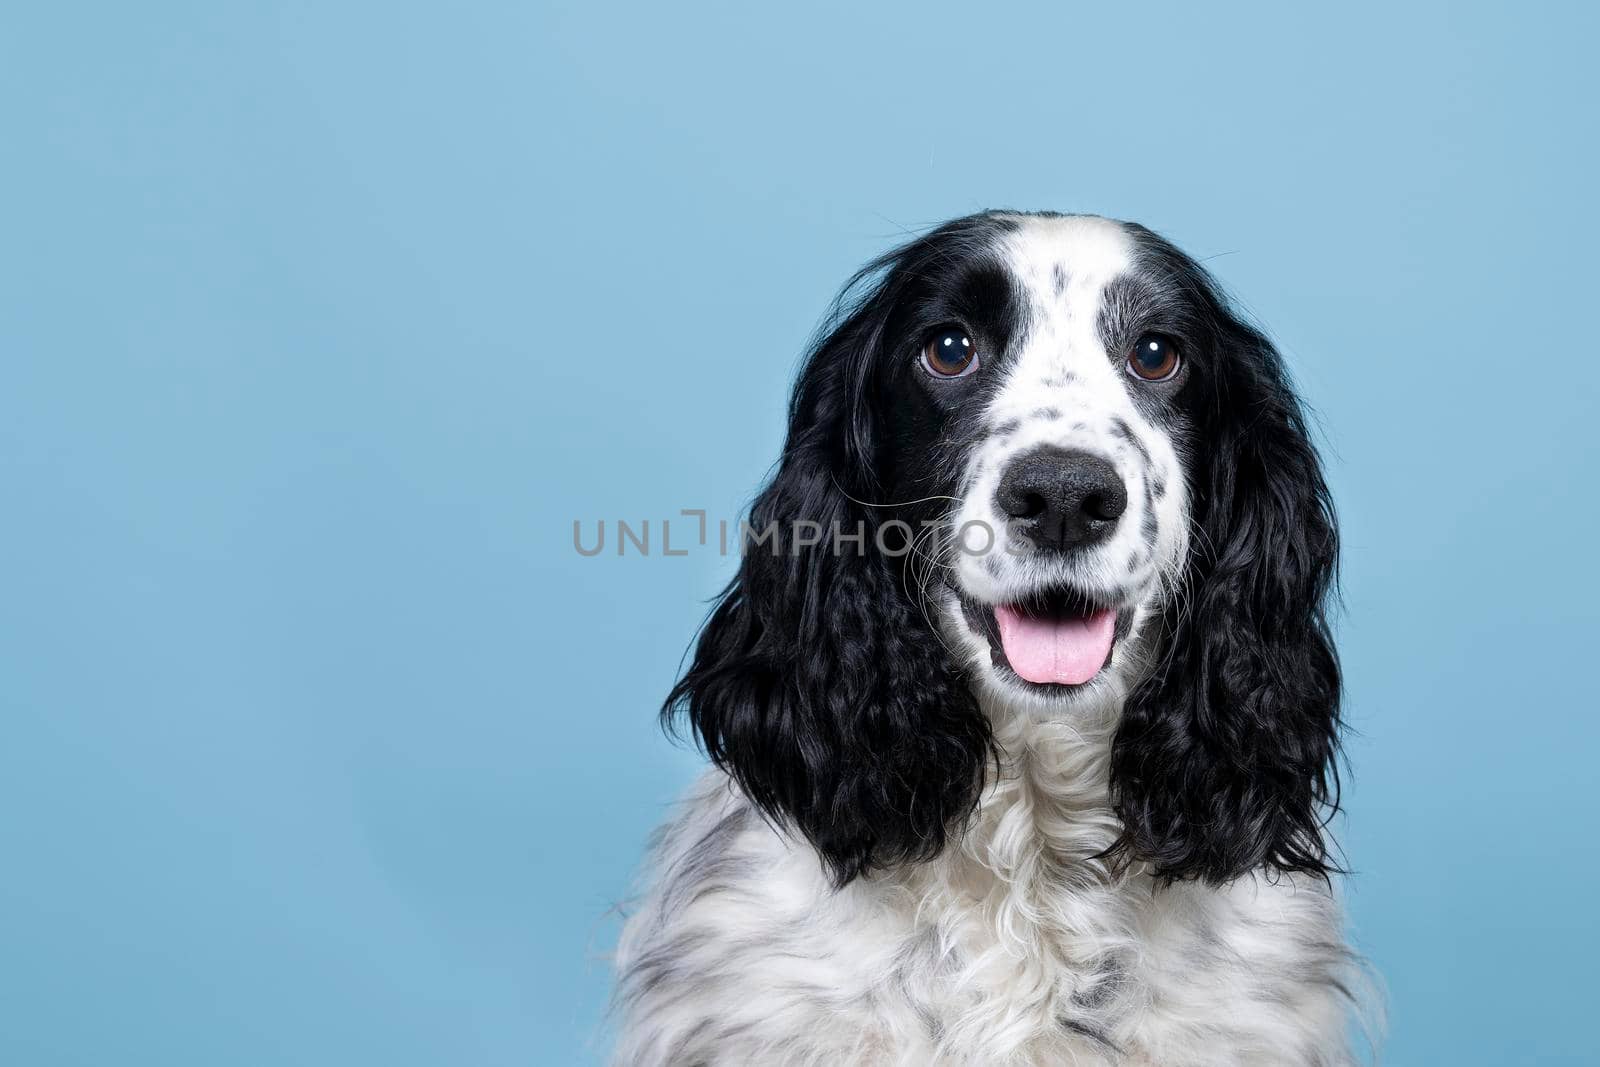 Portrait of an english cocker spaniel looking at the camera on a blue background by LeoniekvanderVliet